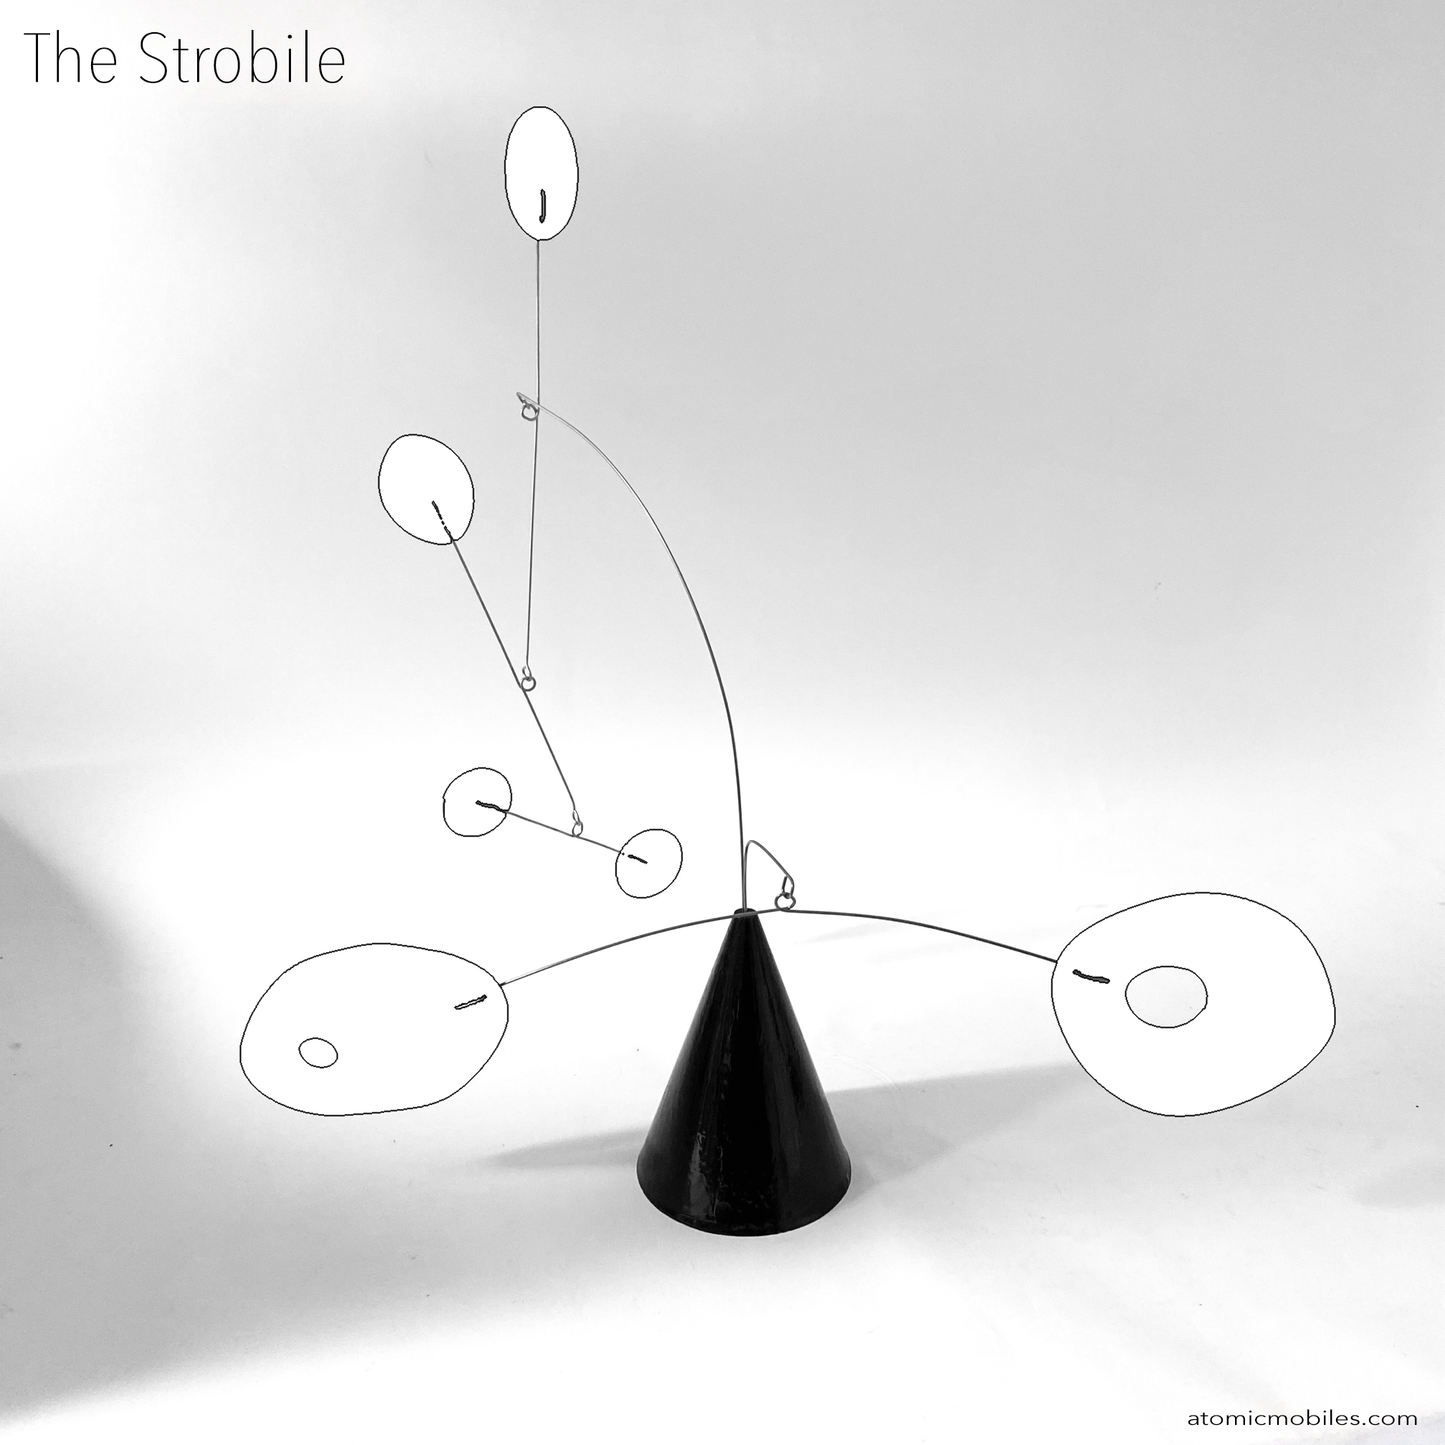 The Strobile table top kinetic art sculpture in black and white by AtomicMobiles.com